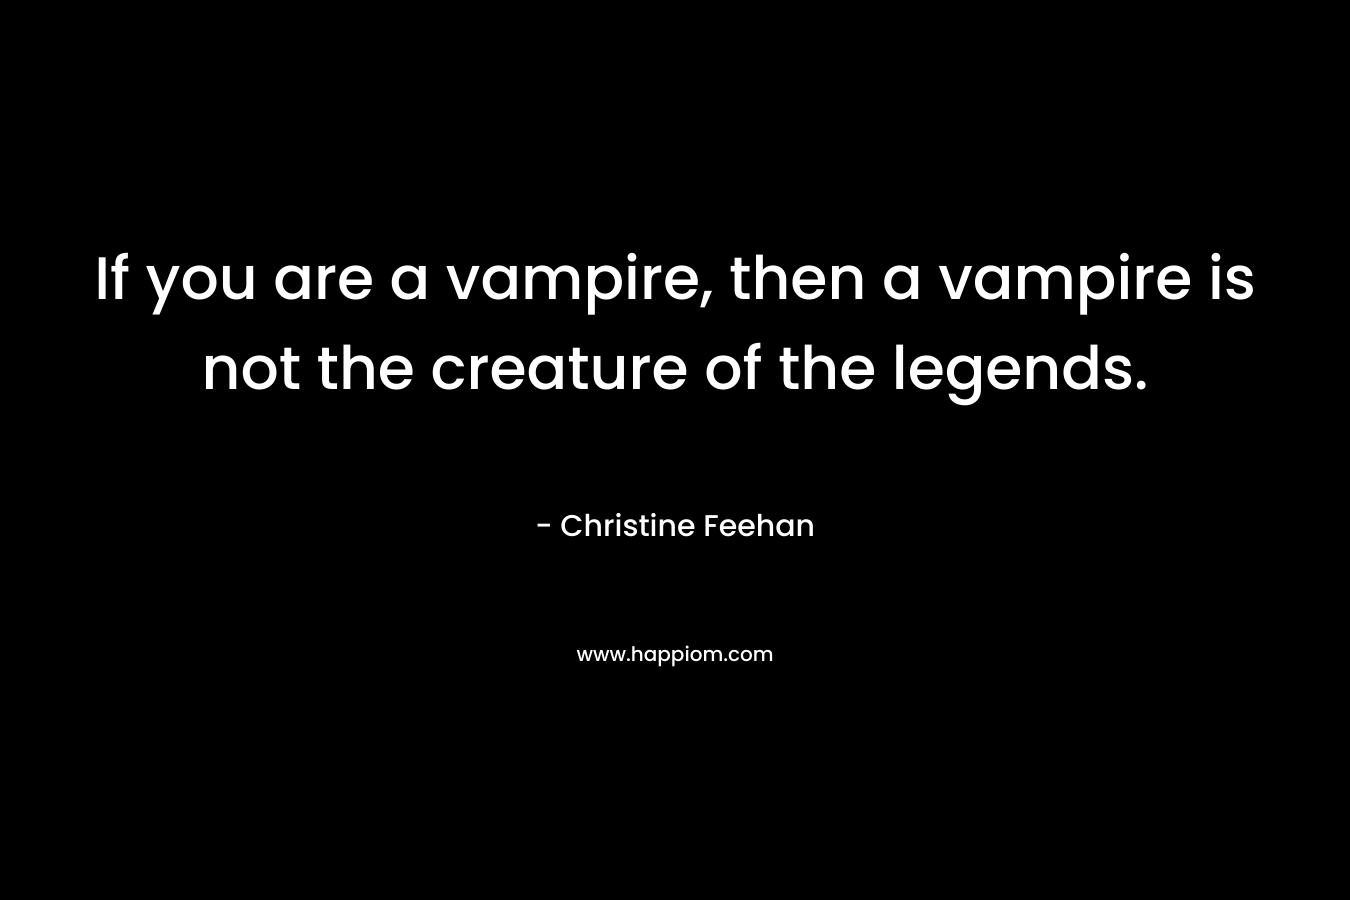 If you are a vampire, then a vampire is not the creature of the legends.